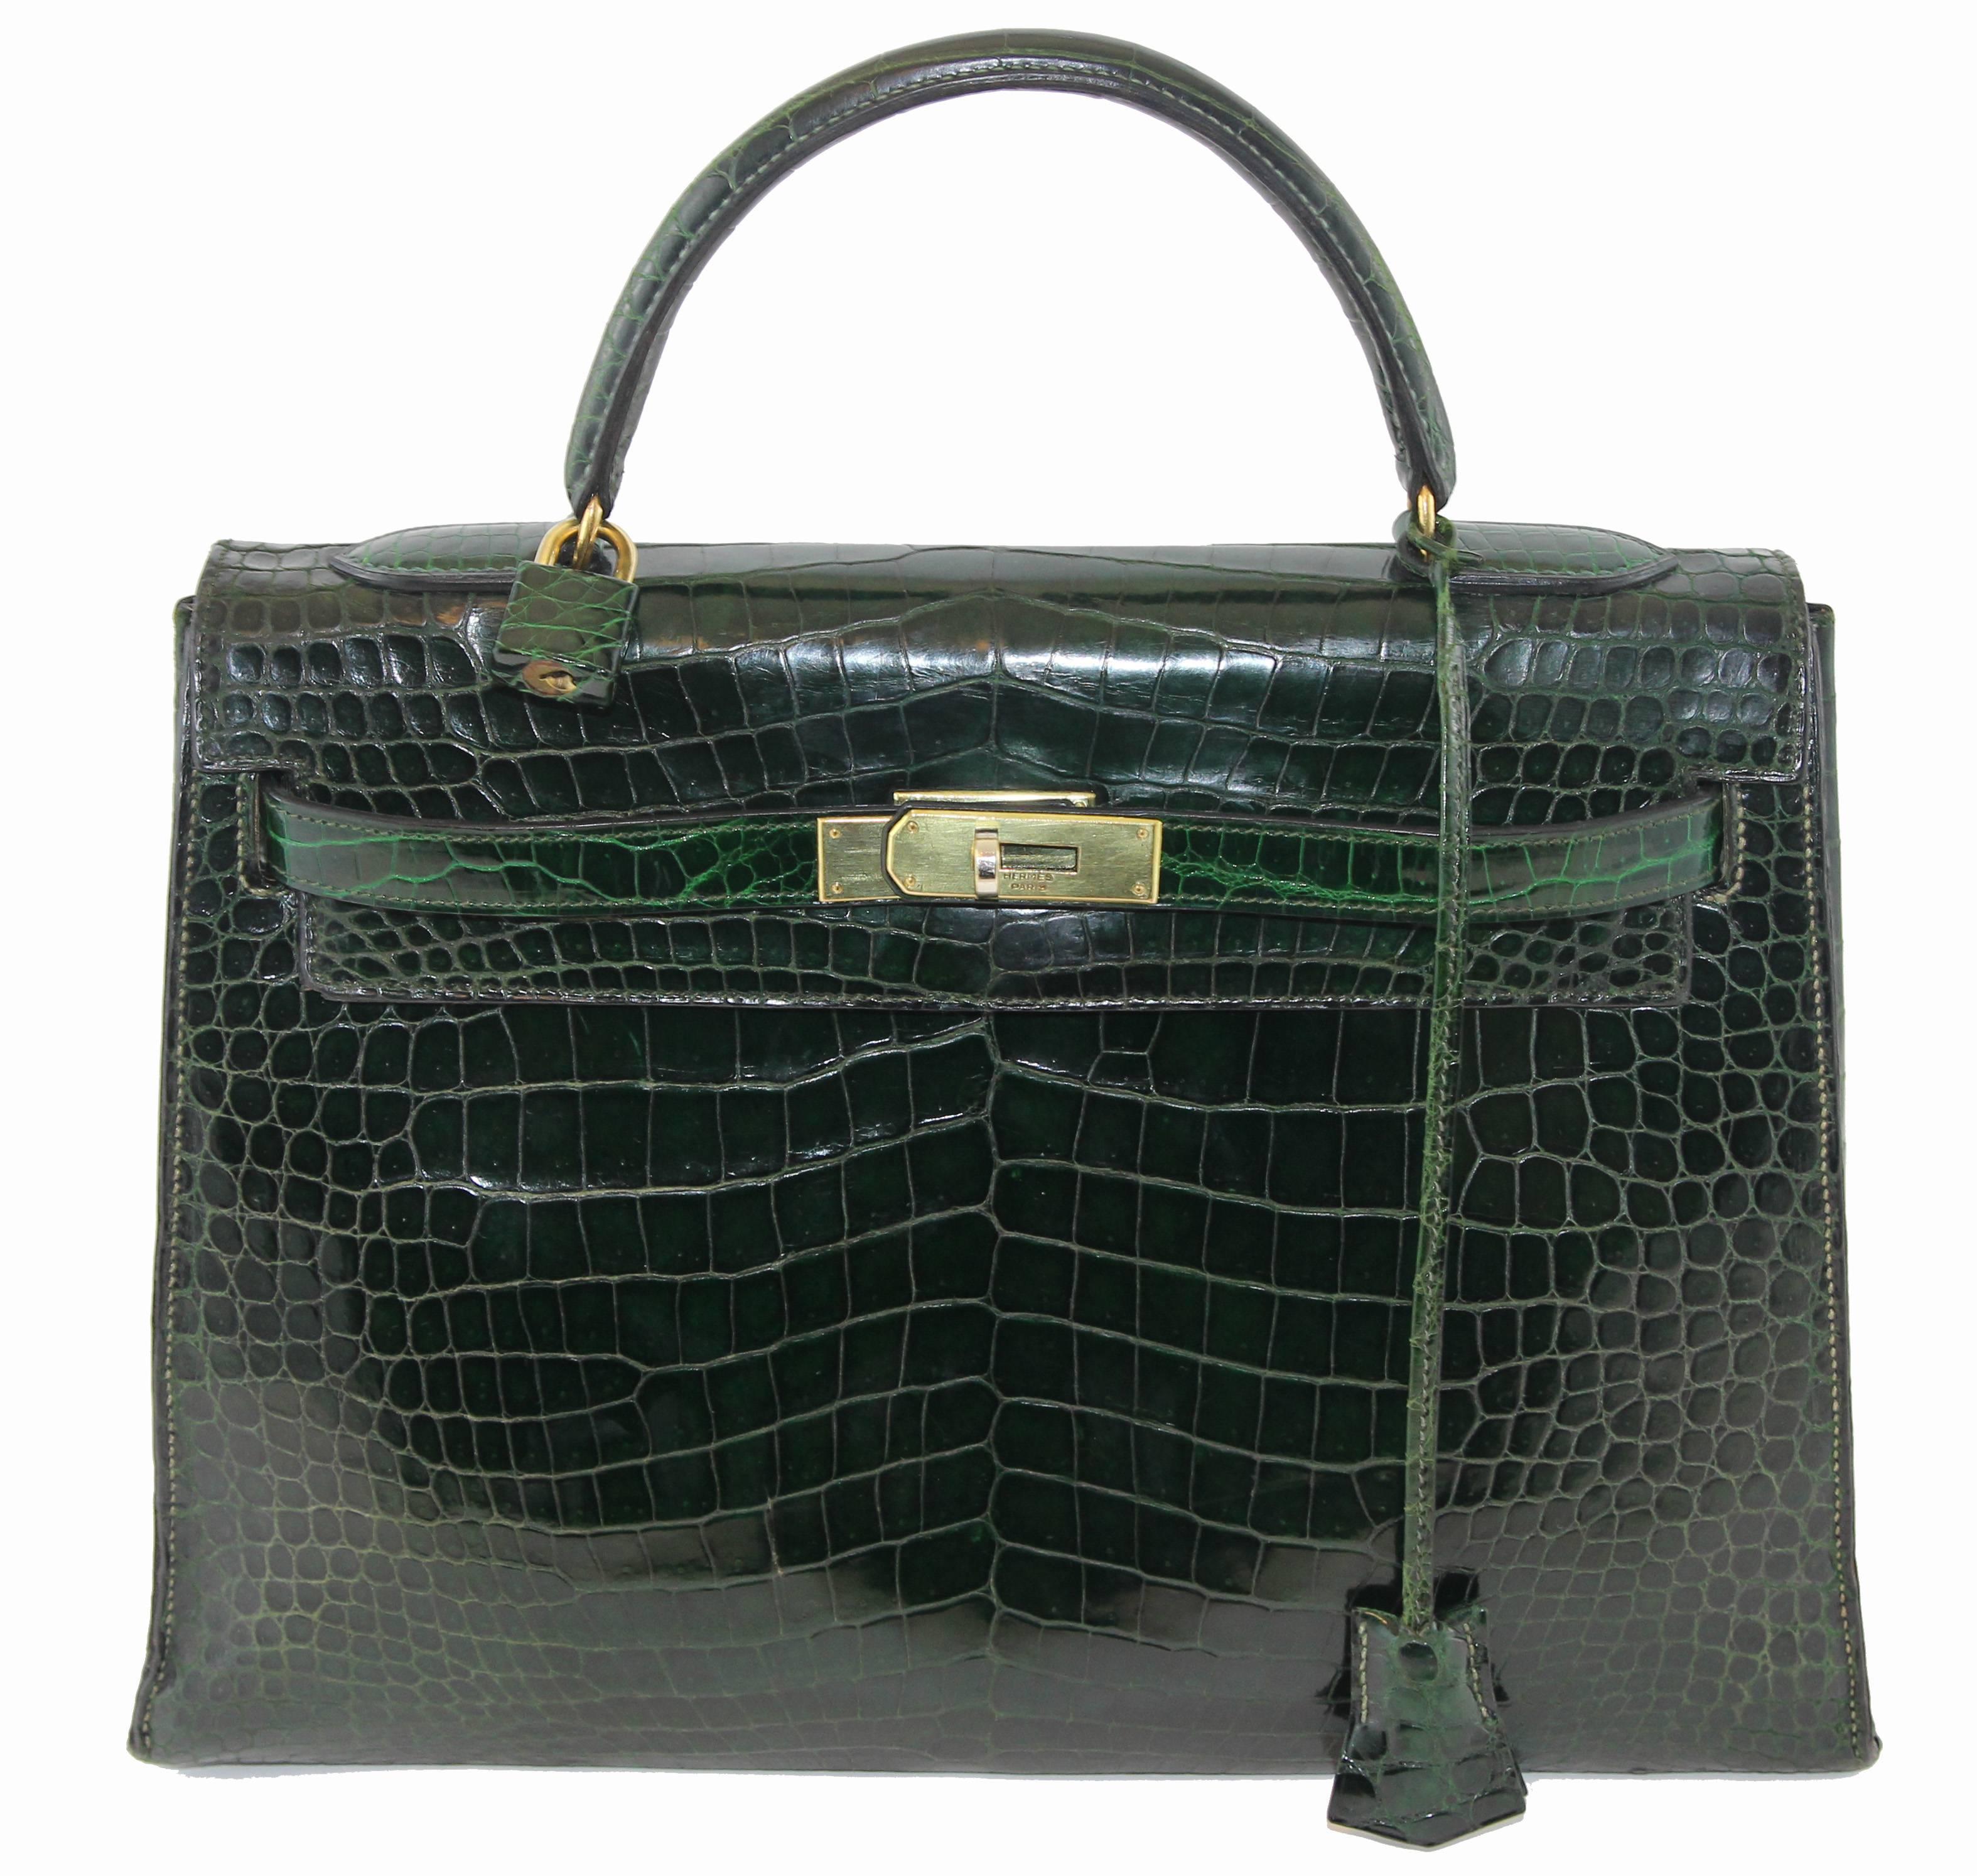 Beautifull and vintage green Hermès Kelly Handbag of the 60s. Some restore and the shoulder strap have been made by an artisan of Hermès. Gold hardware finishing. 
The bag will be sent with certificate and cites. Cites made under the name of the